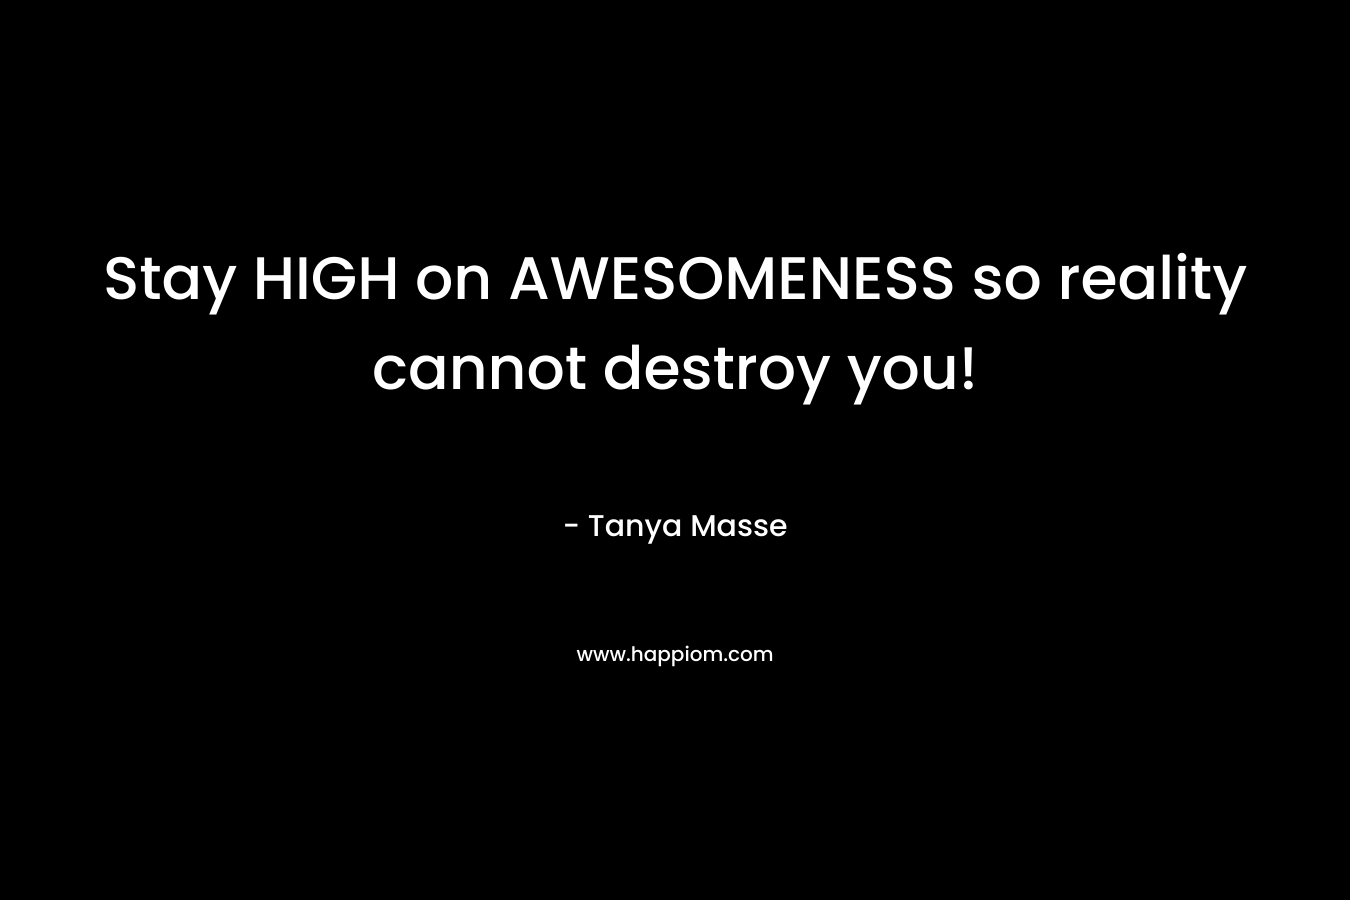 Stay HIGH on AWESOMENESS so reality cannot destroy you! – Tanya Masse